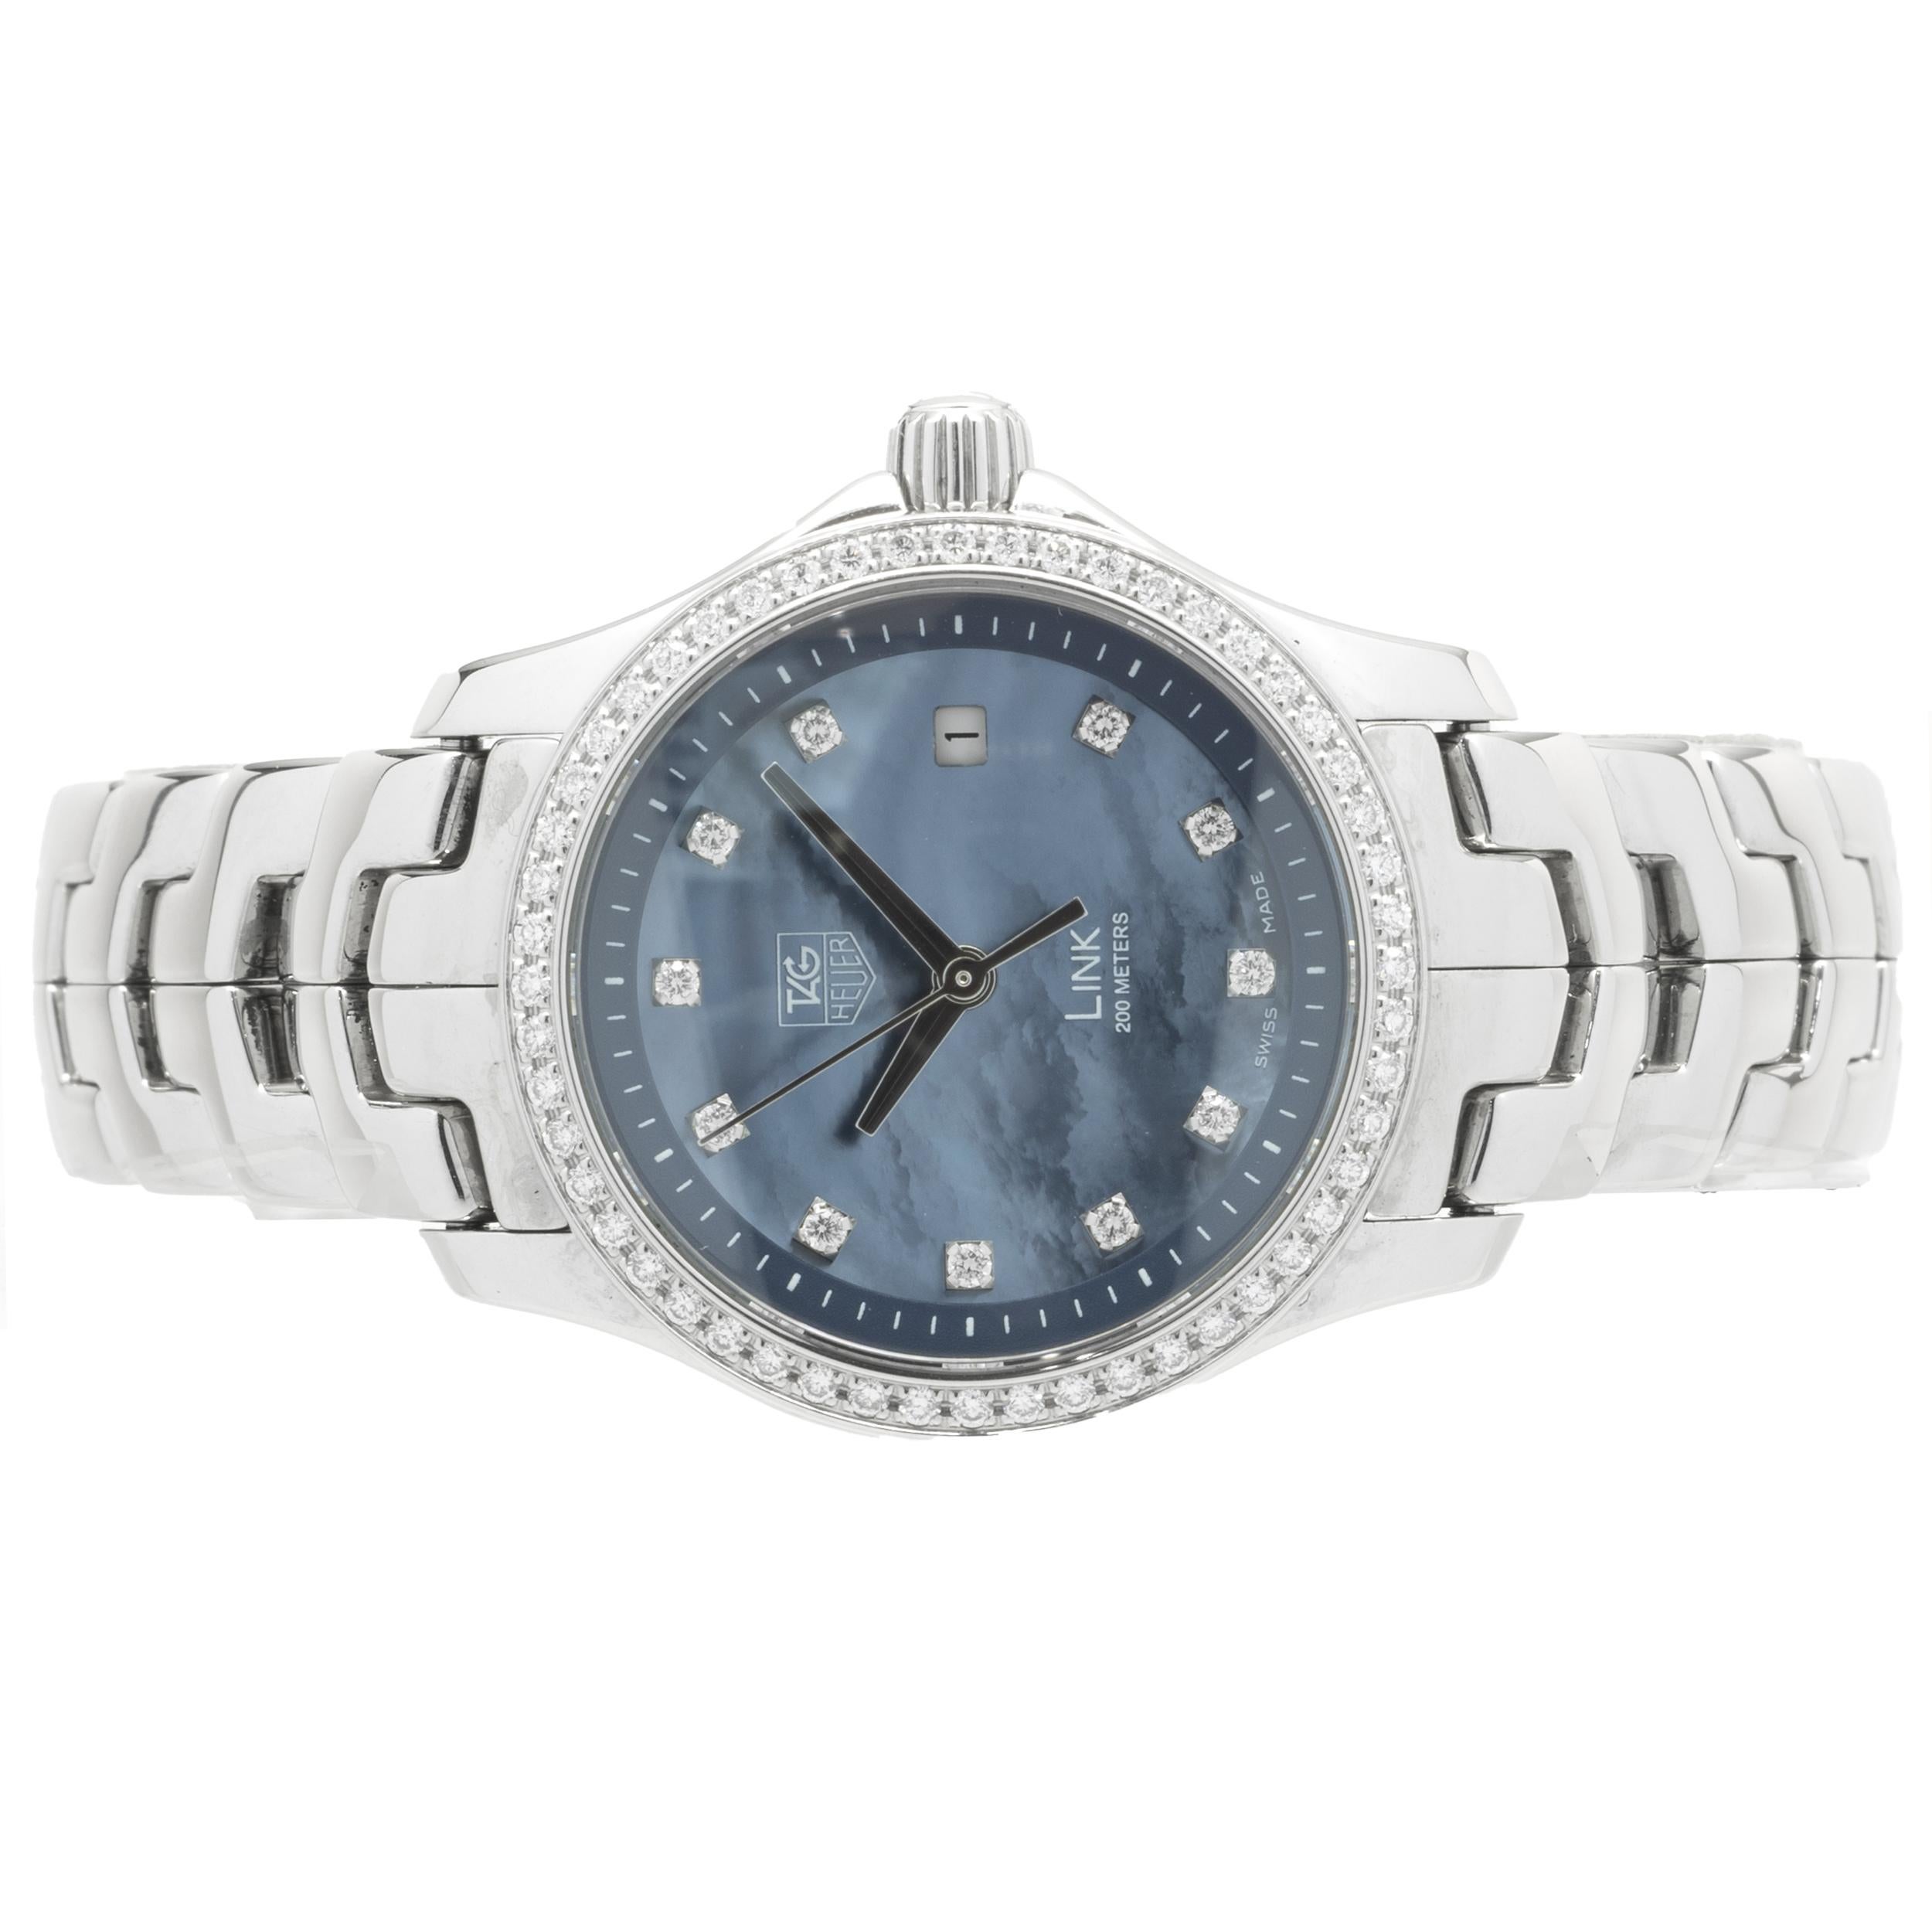 Movement: automatic
Function: hours, minutes, seconds, date, chronograph
Case: 27mm round case with diamond bezel
Dial: black mother of pearl diamond dial
Band: Tag Heuer stainless steel Link bracelet
Reference#: WJF131G
Serial #: YL2XXX

Complete